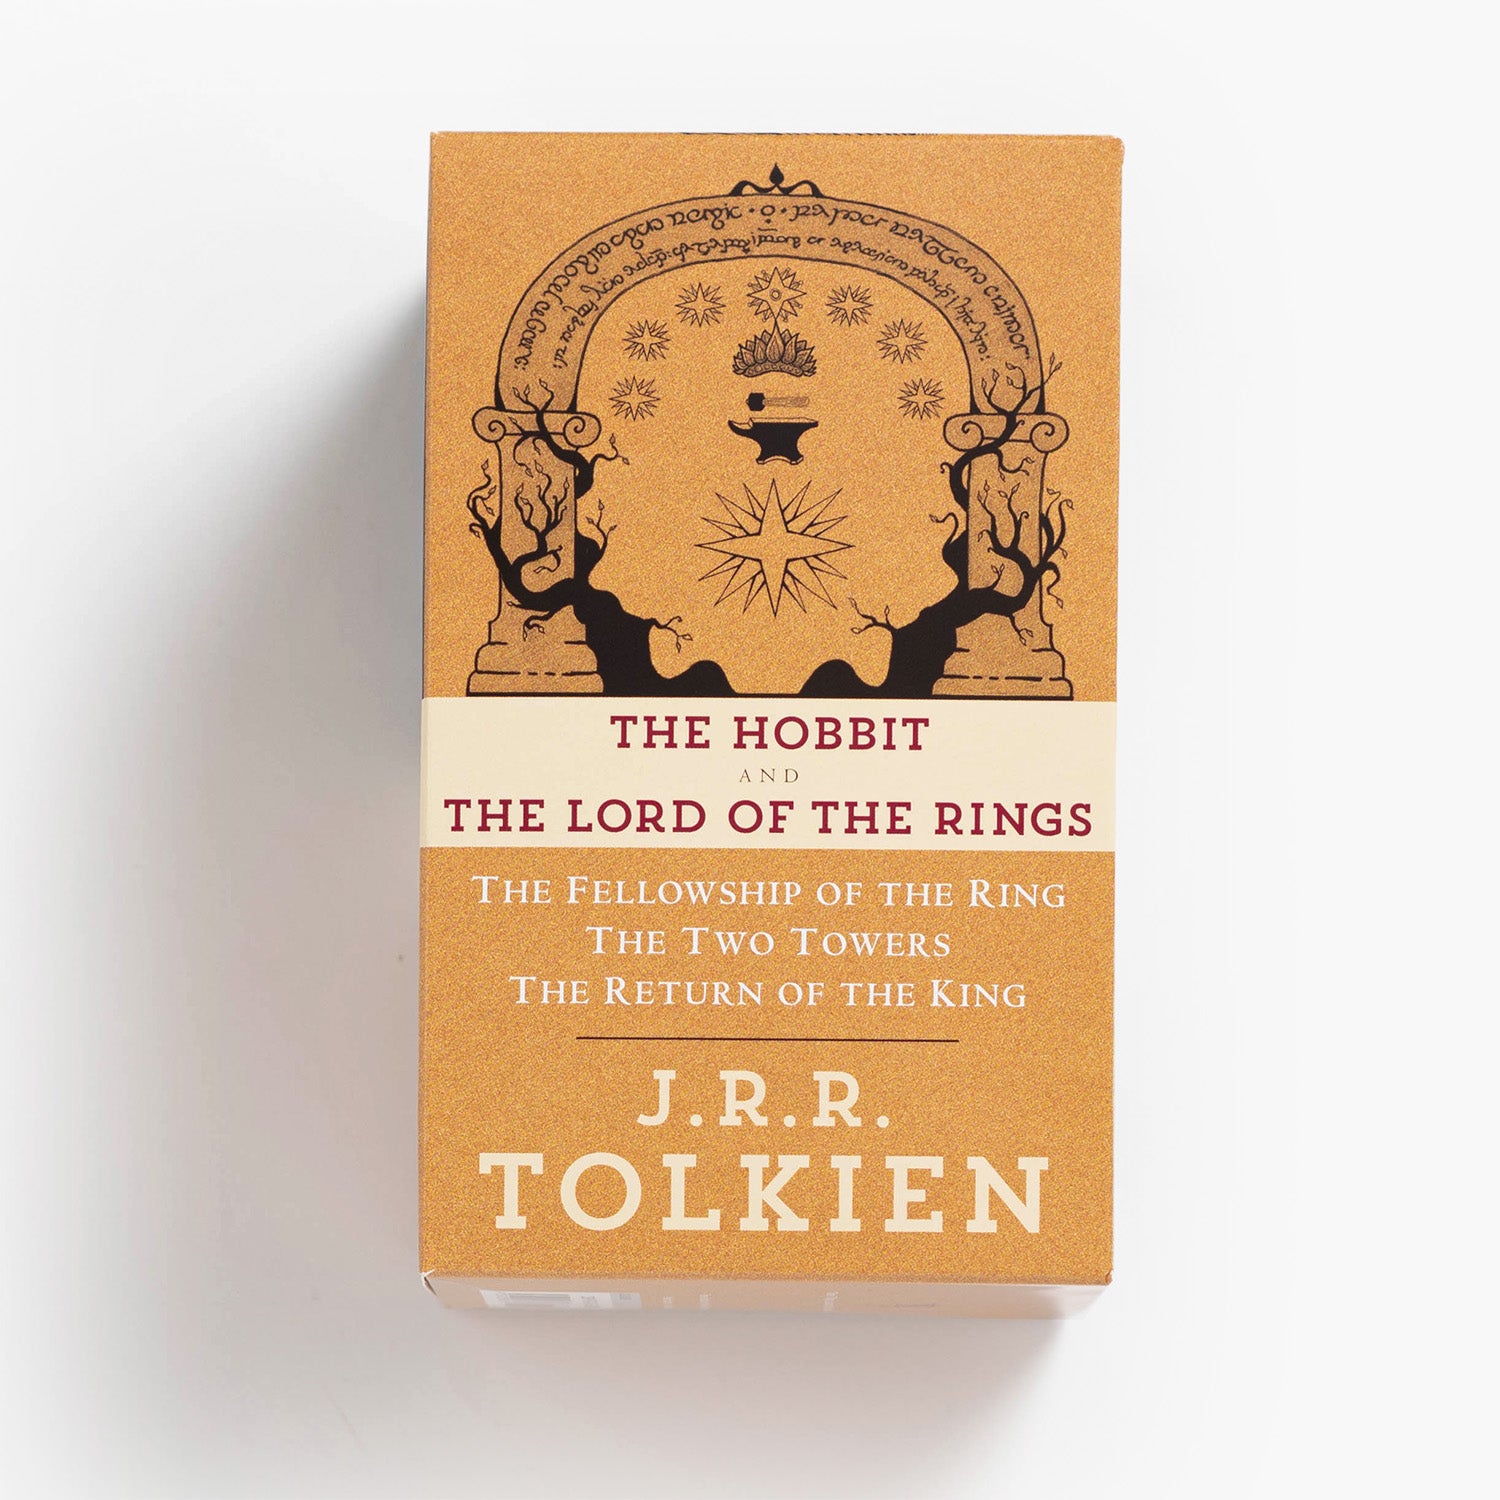 The Lord of the Rings & The Hobbit Boxed Set